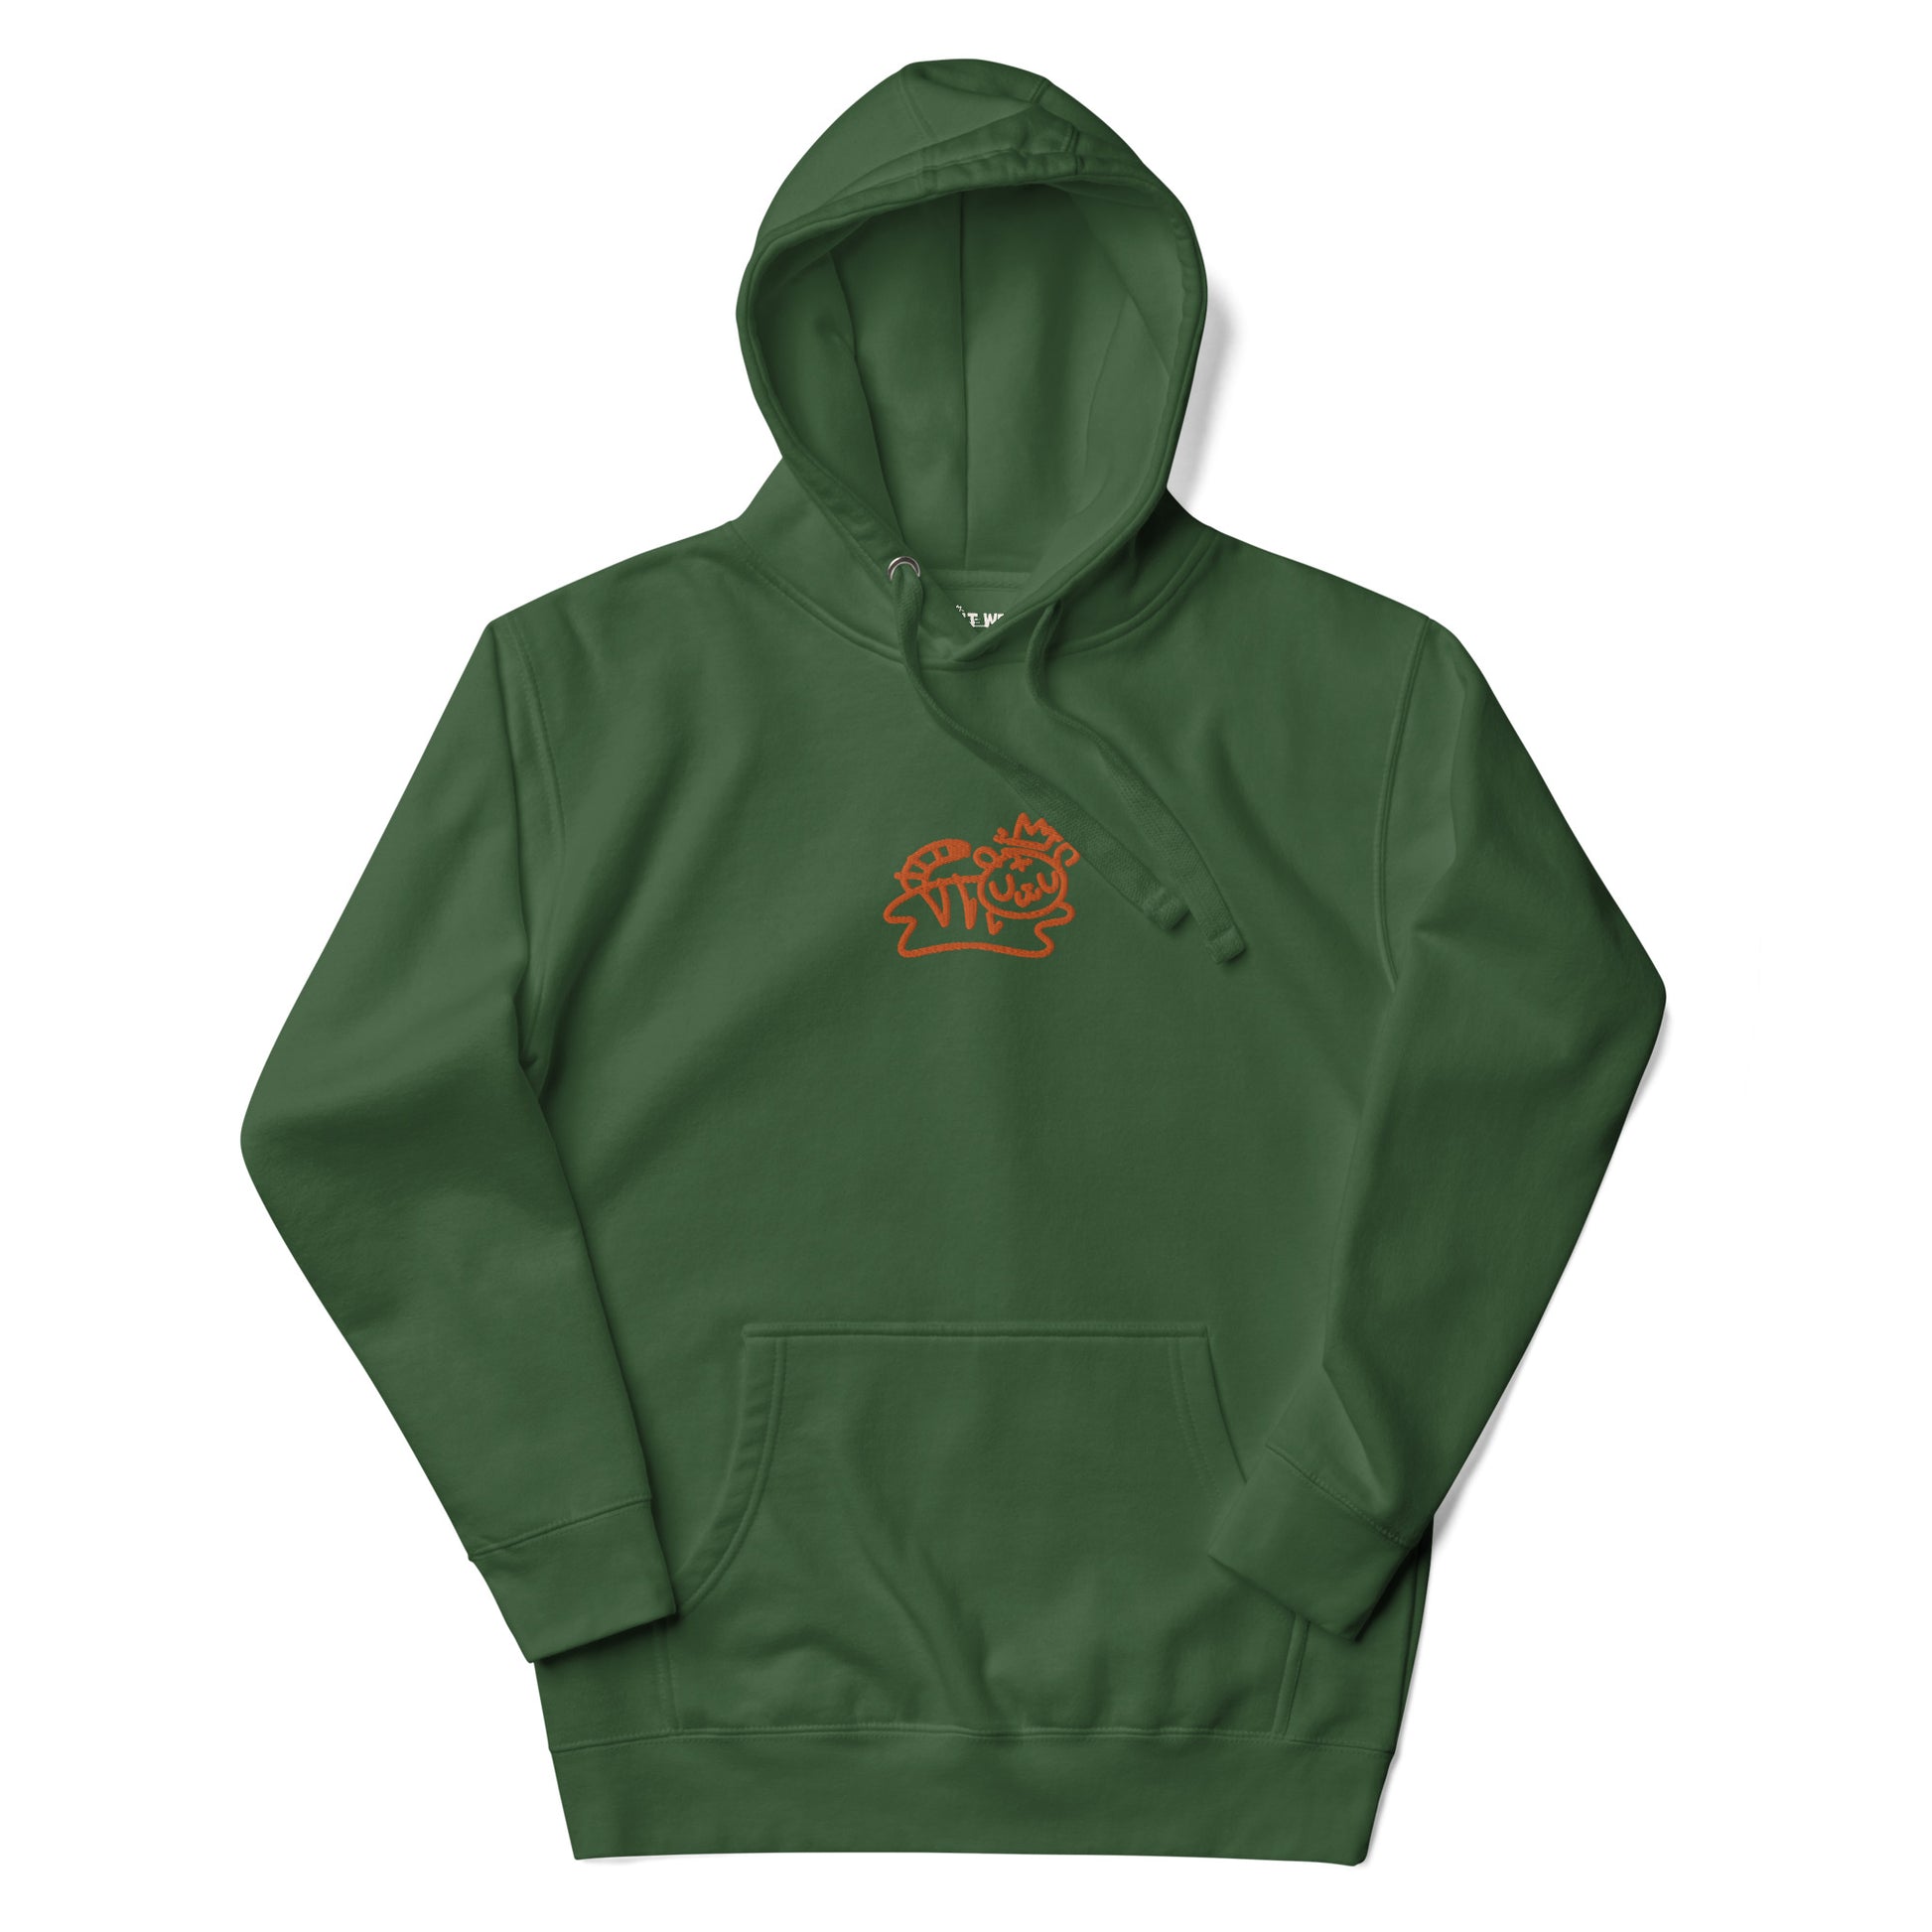 forest green pullover hoodie with embroidered bolt-wear tiger logo on chest 